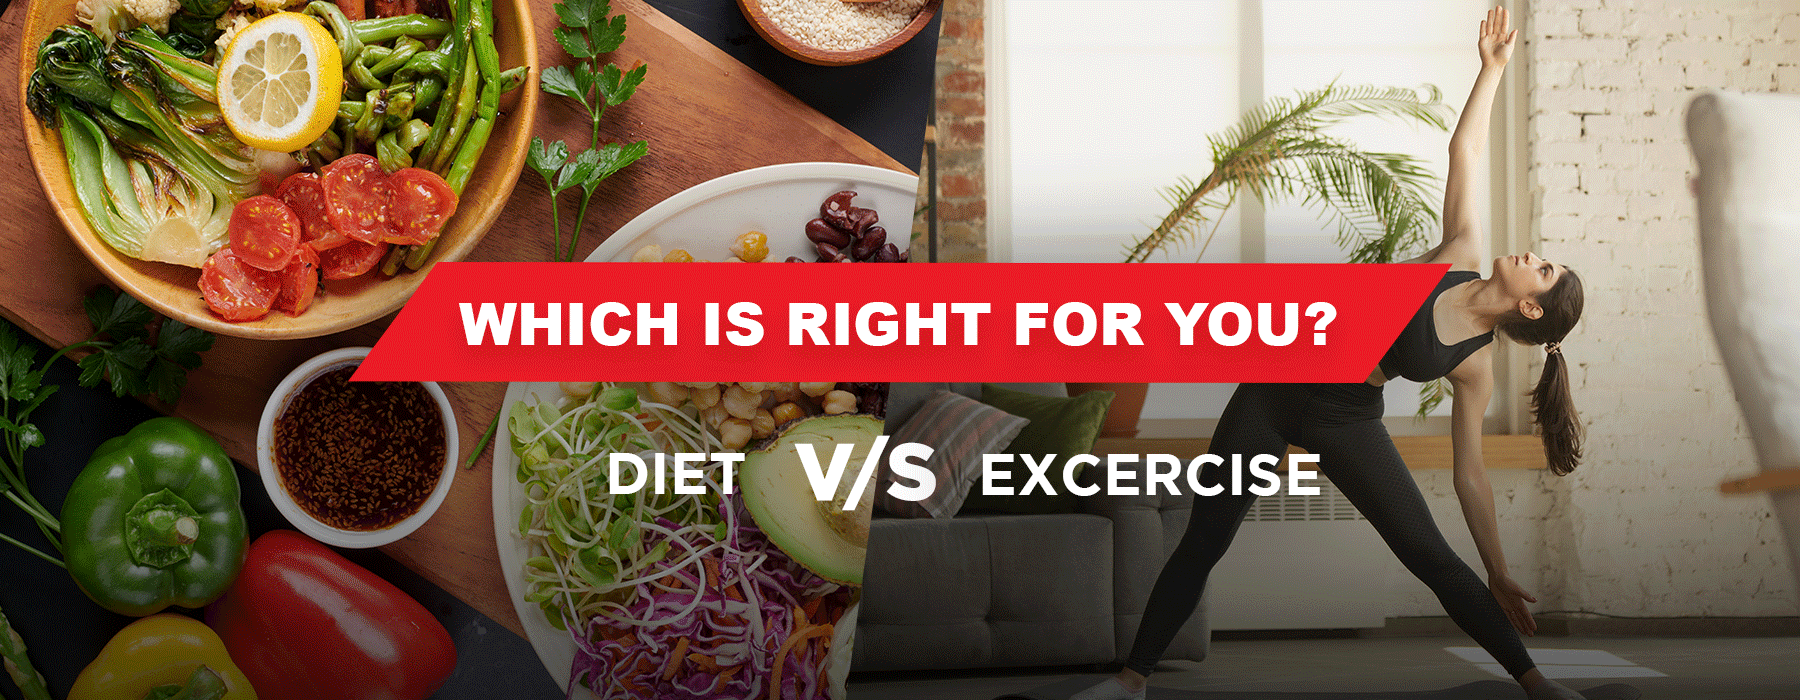 Diet vs exercise which one is more important for weight loss?